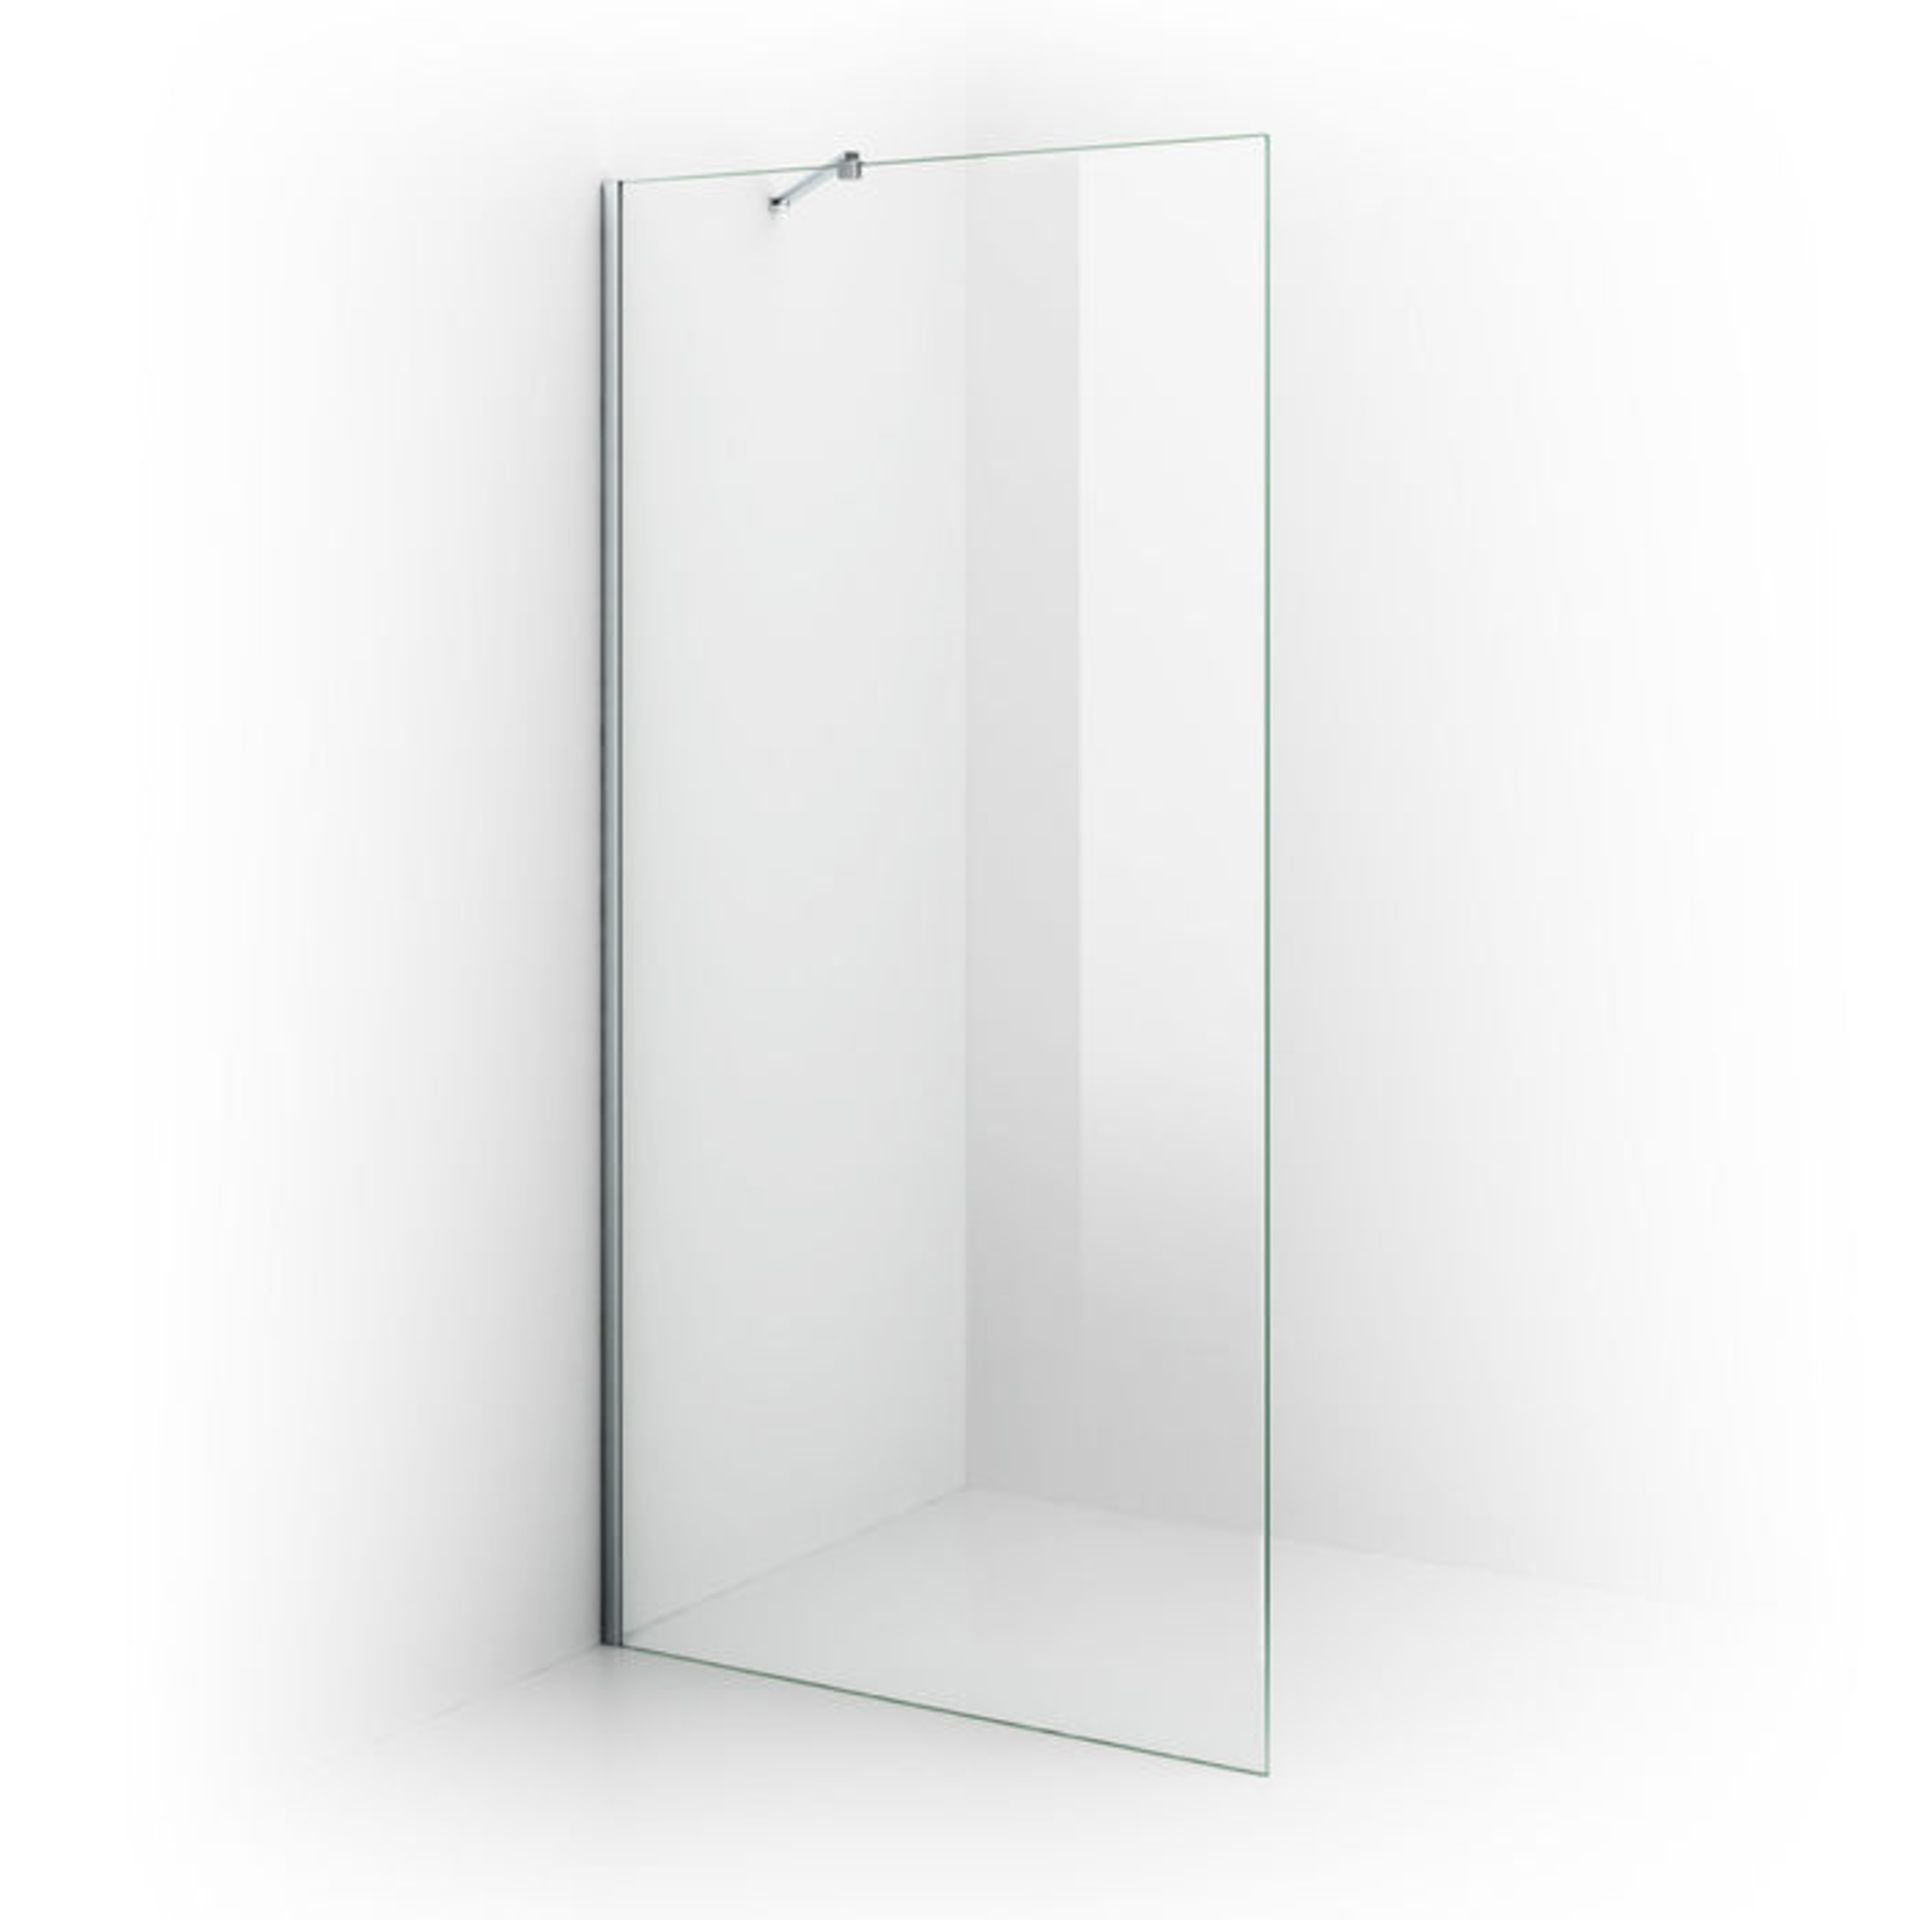 (A150) 700mm - 8mm - Designer EasyClean Wetroom Panel. RRP £299.99. 8mm EasyClean glass - Our ... - Image 3 of 4